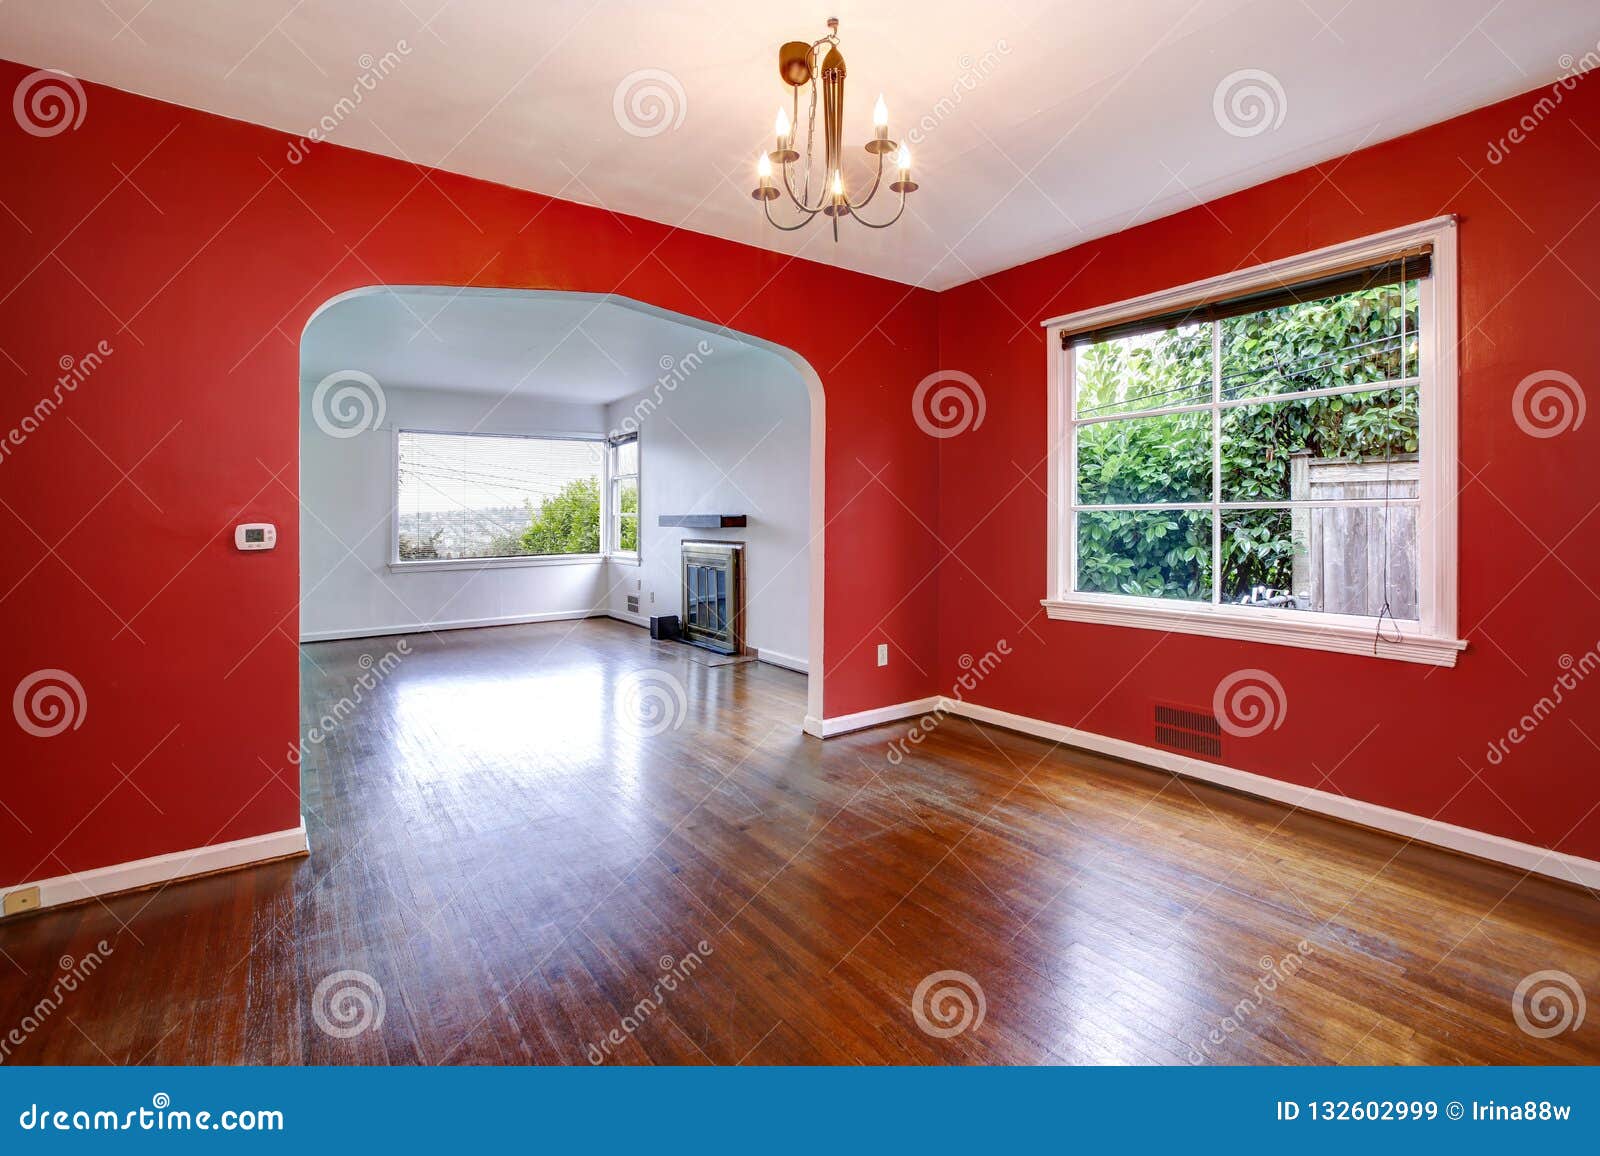 Red Dining Room Interior Of Craftsman Style House Stock